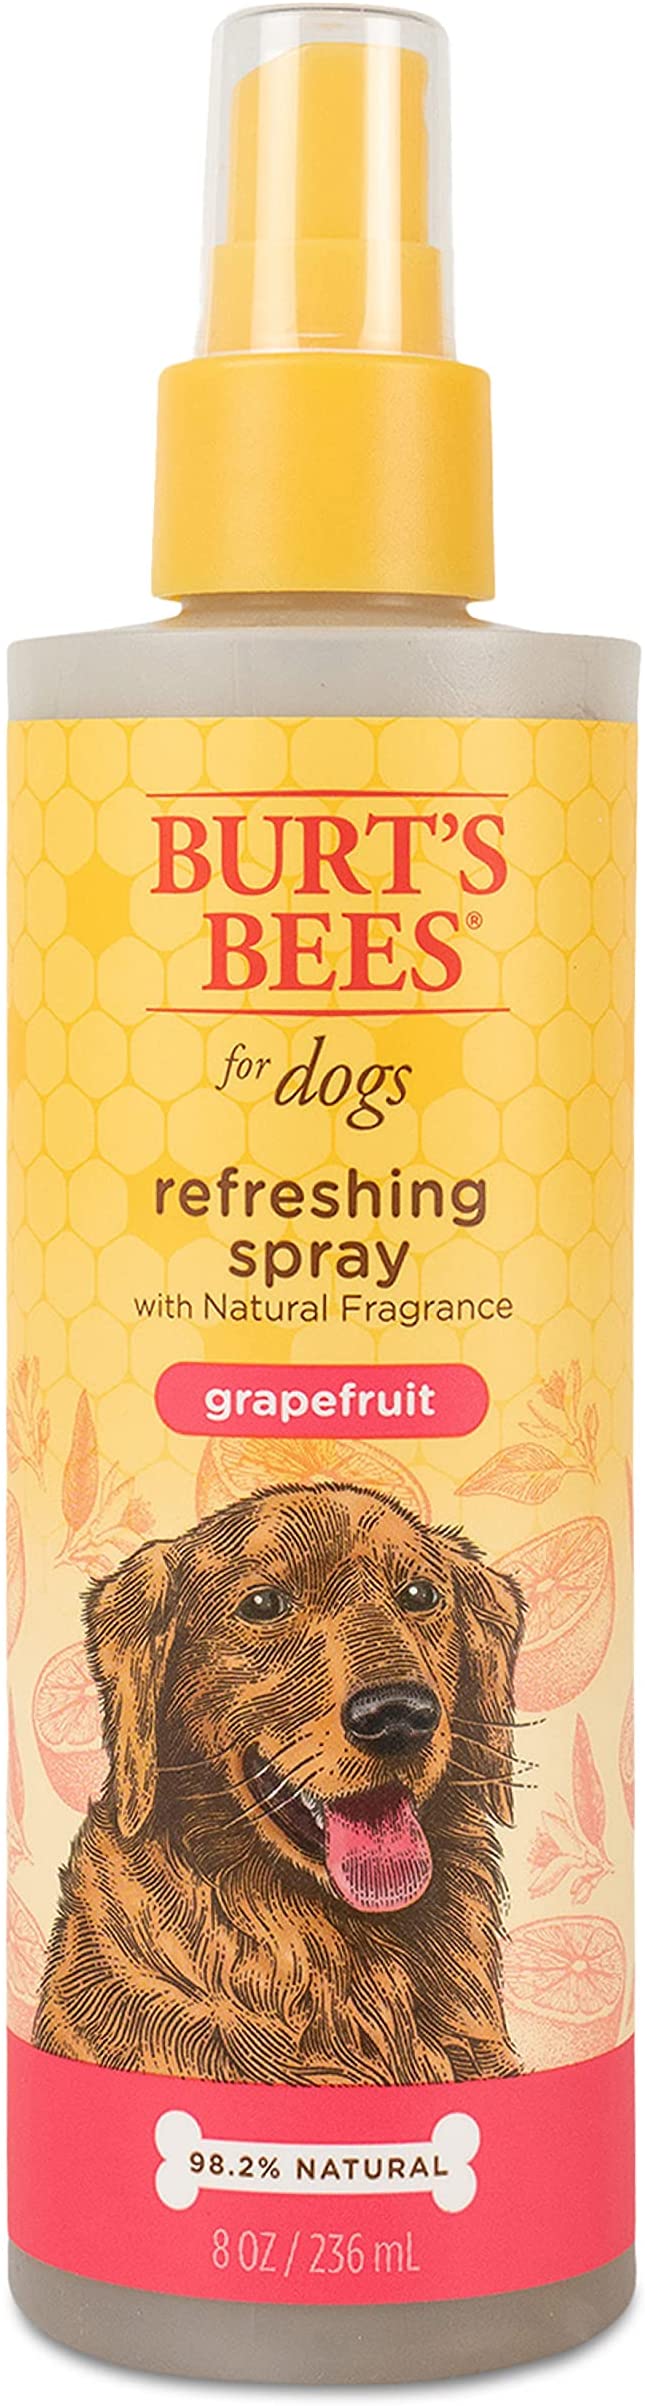 Burt's Bees for Dogs Dog Grooming Supplies, Grapefruit Fragrance - 2 in 1 Dog Shampoo & Conditioner